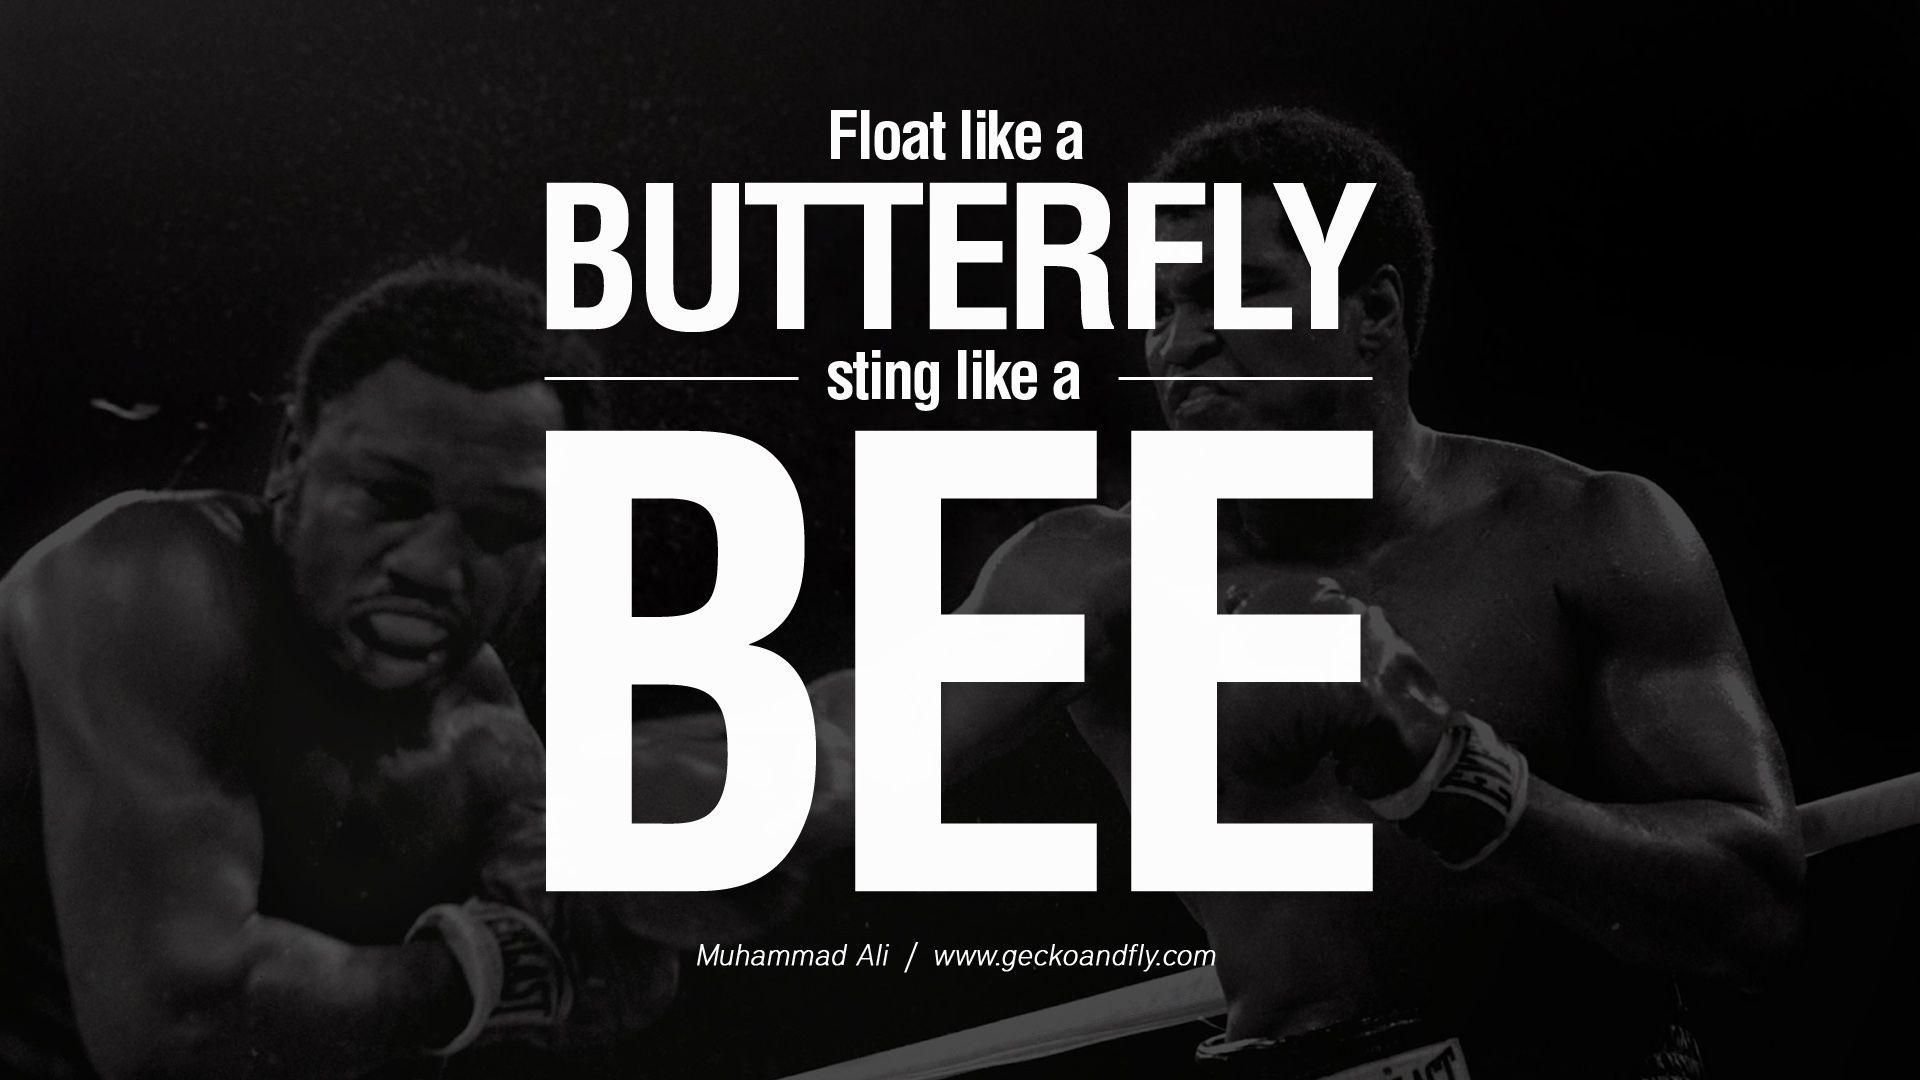 Winning Quotes from Muhammad Ali the Greatest